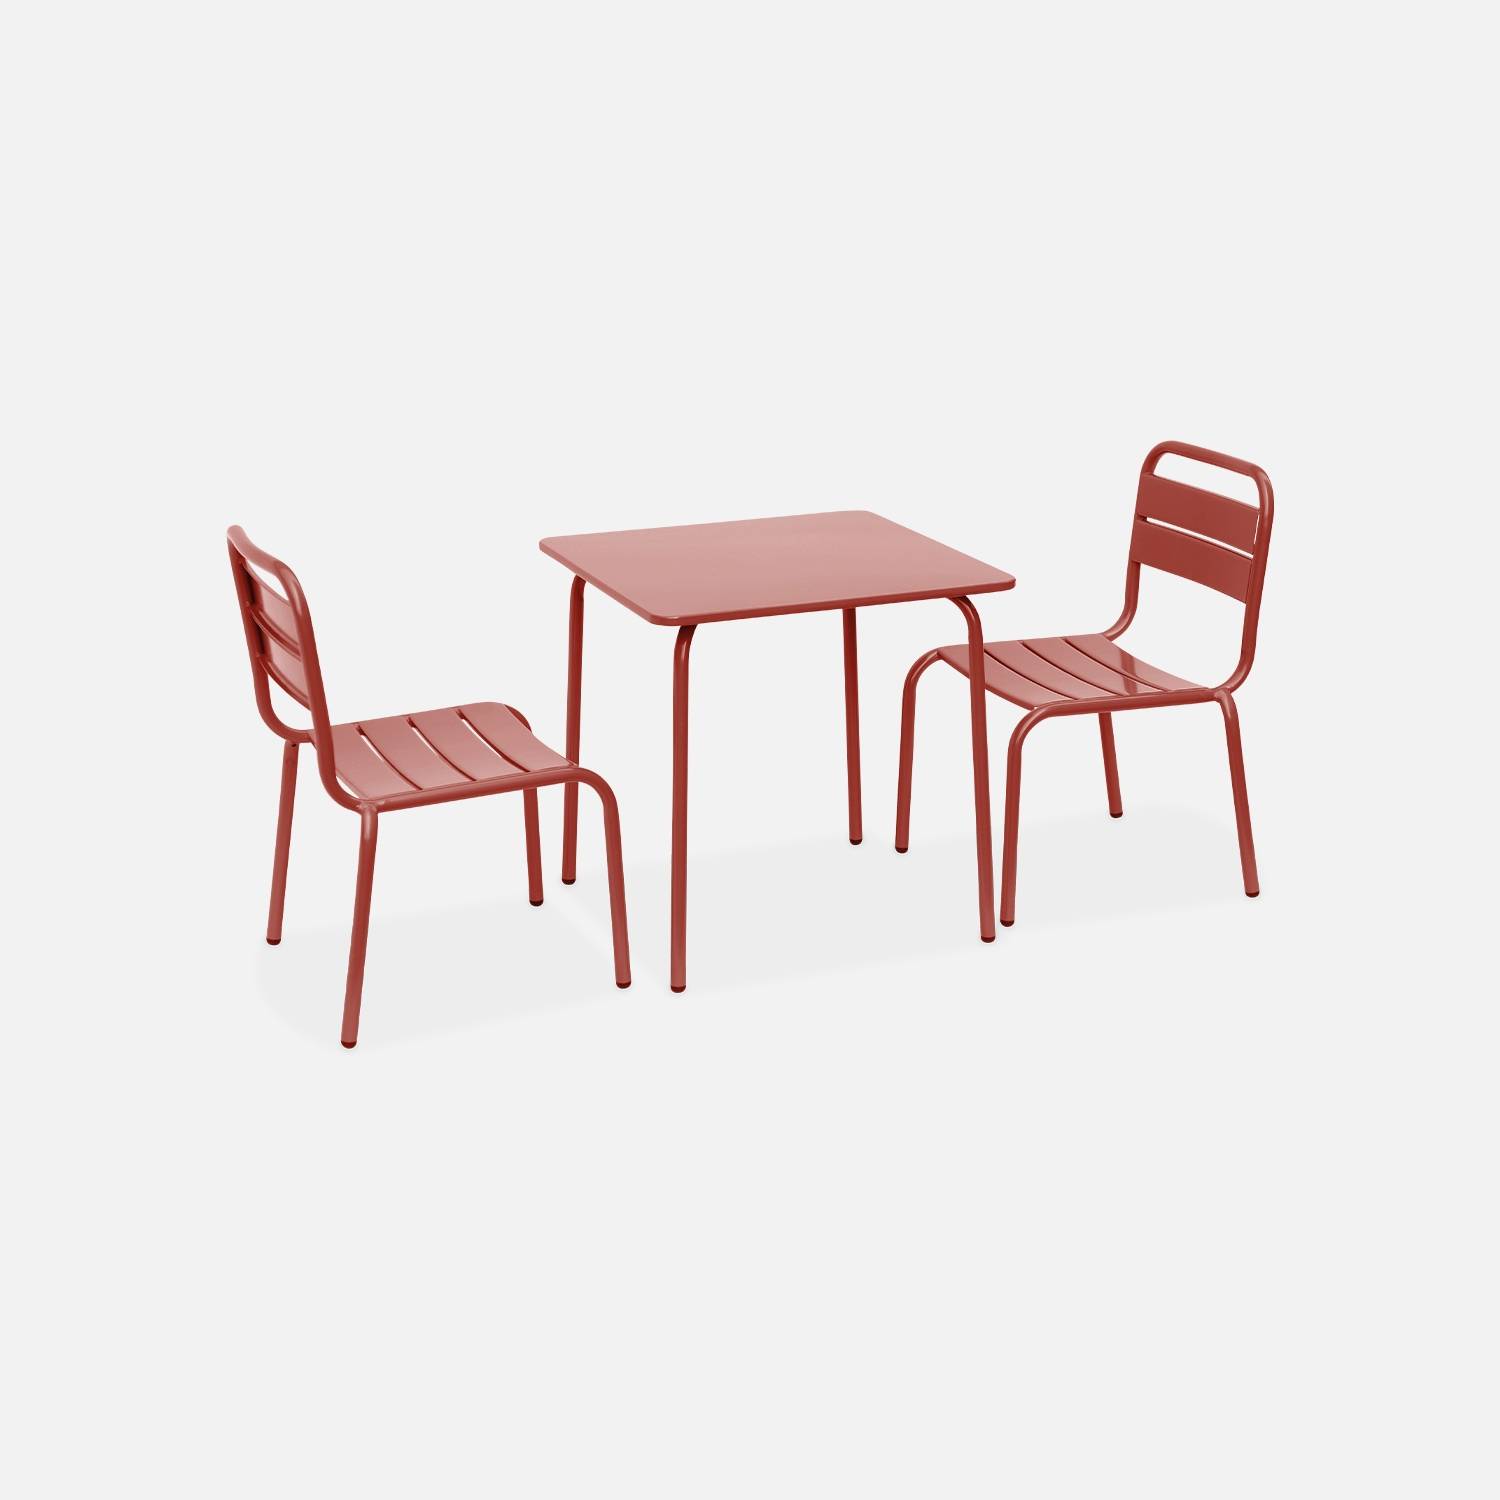 2-seater table and chairs set for kids, metal